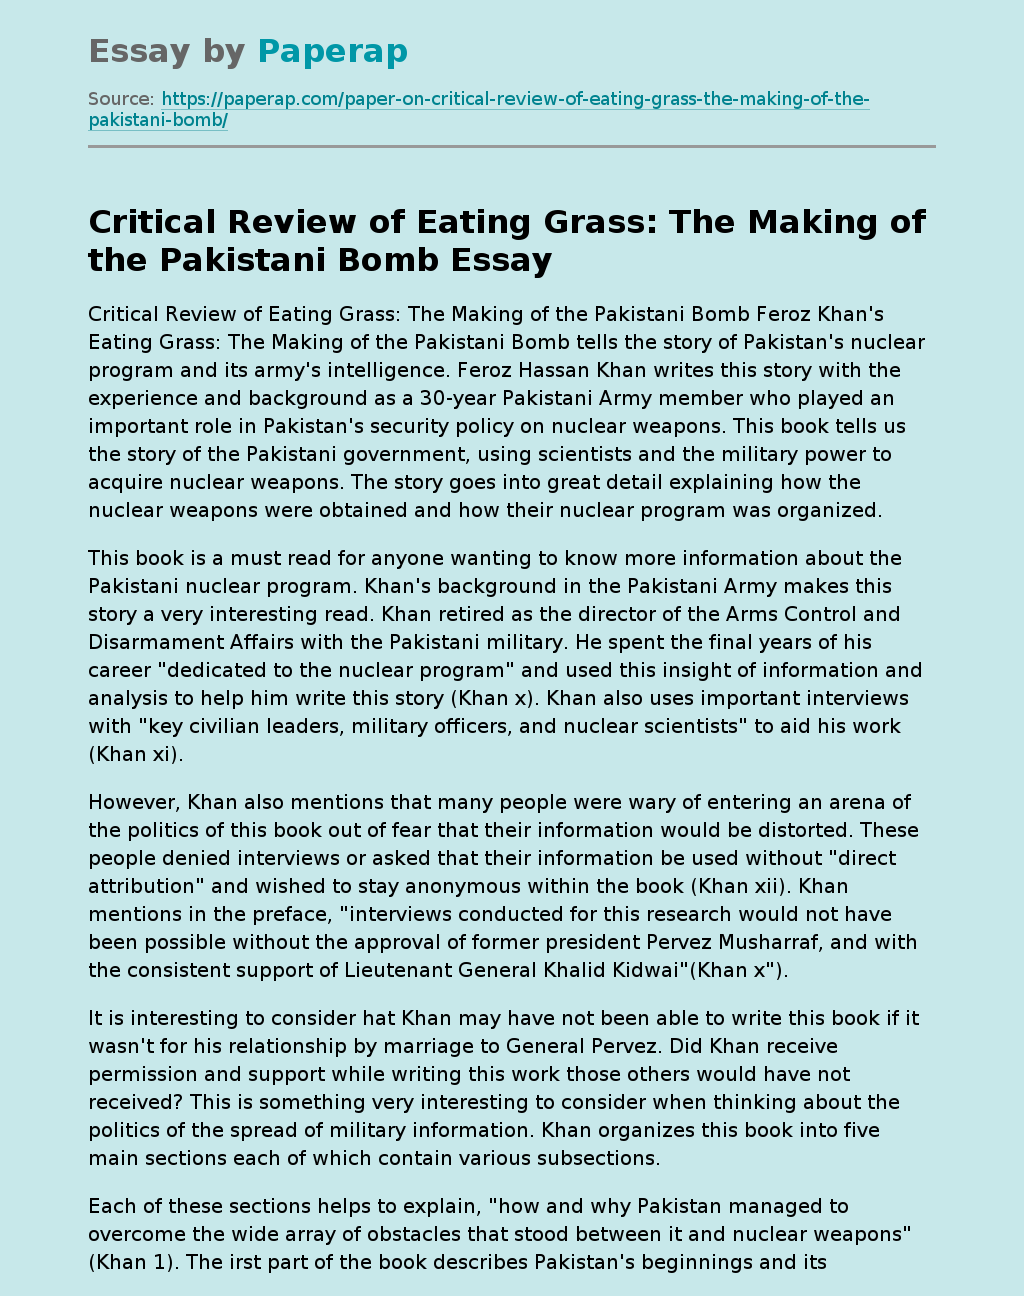 Critical Review of Eating Grass: The Making of the Pakistani Bomb